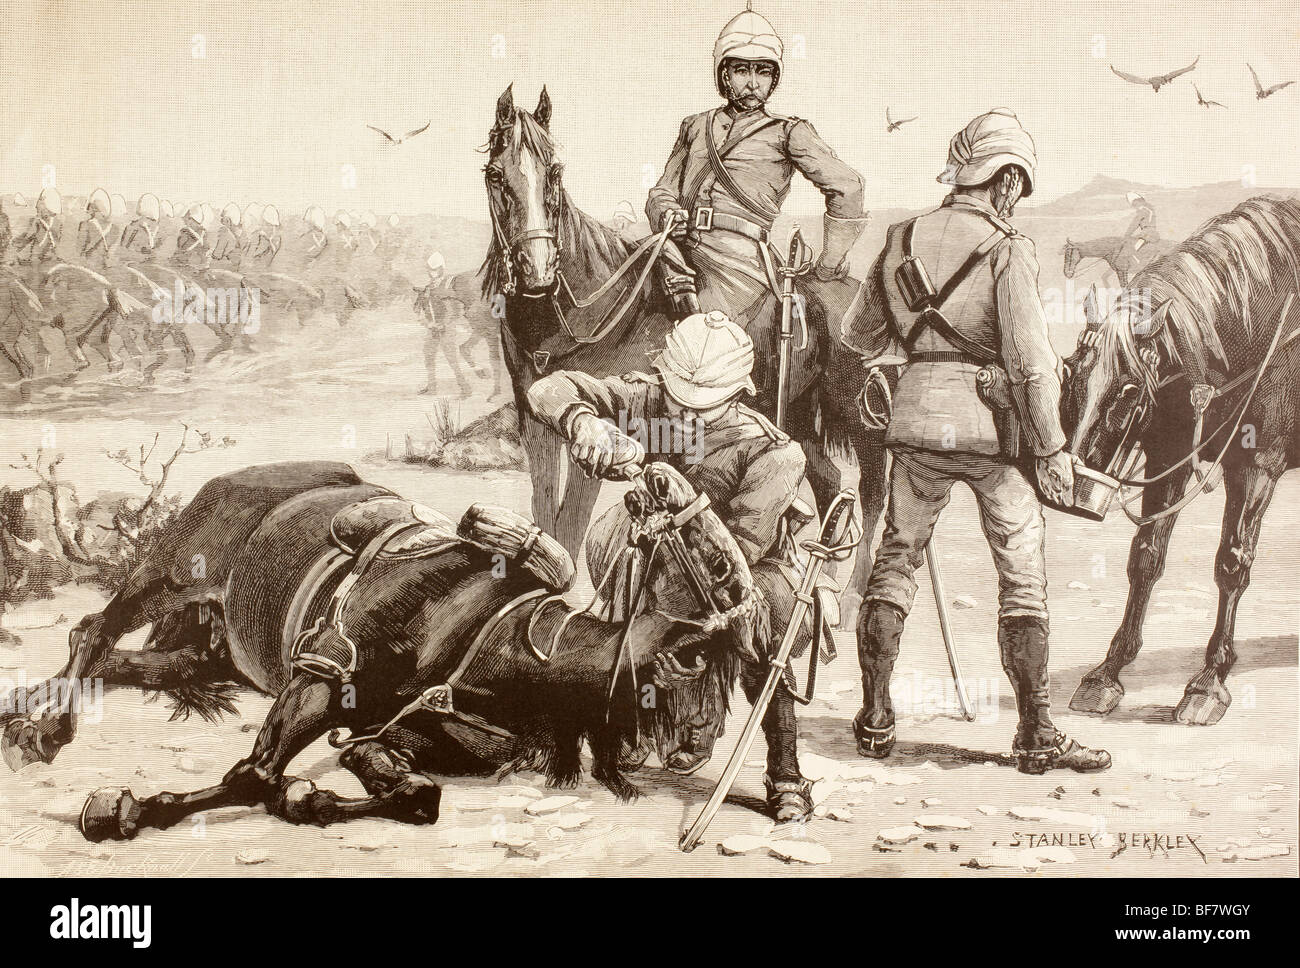 English cavalry watering their horses during the Mahdist War, Sudan in the 1880s. Stock Photo